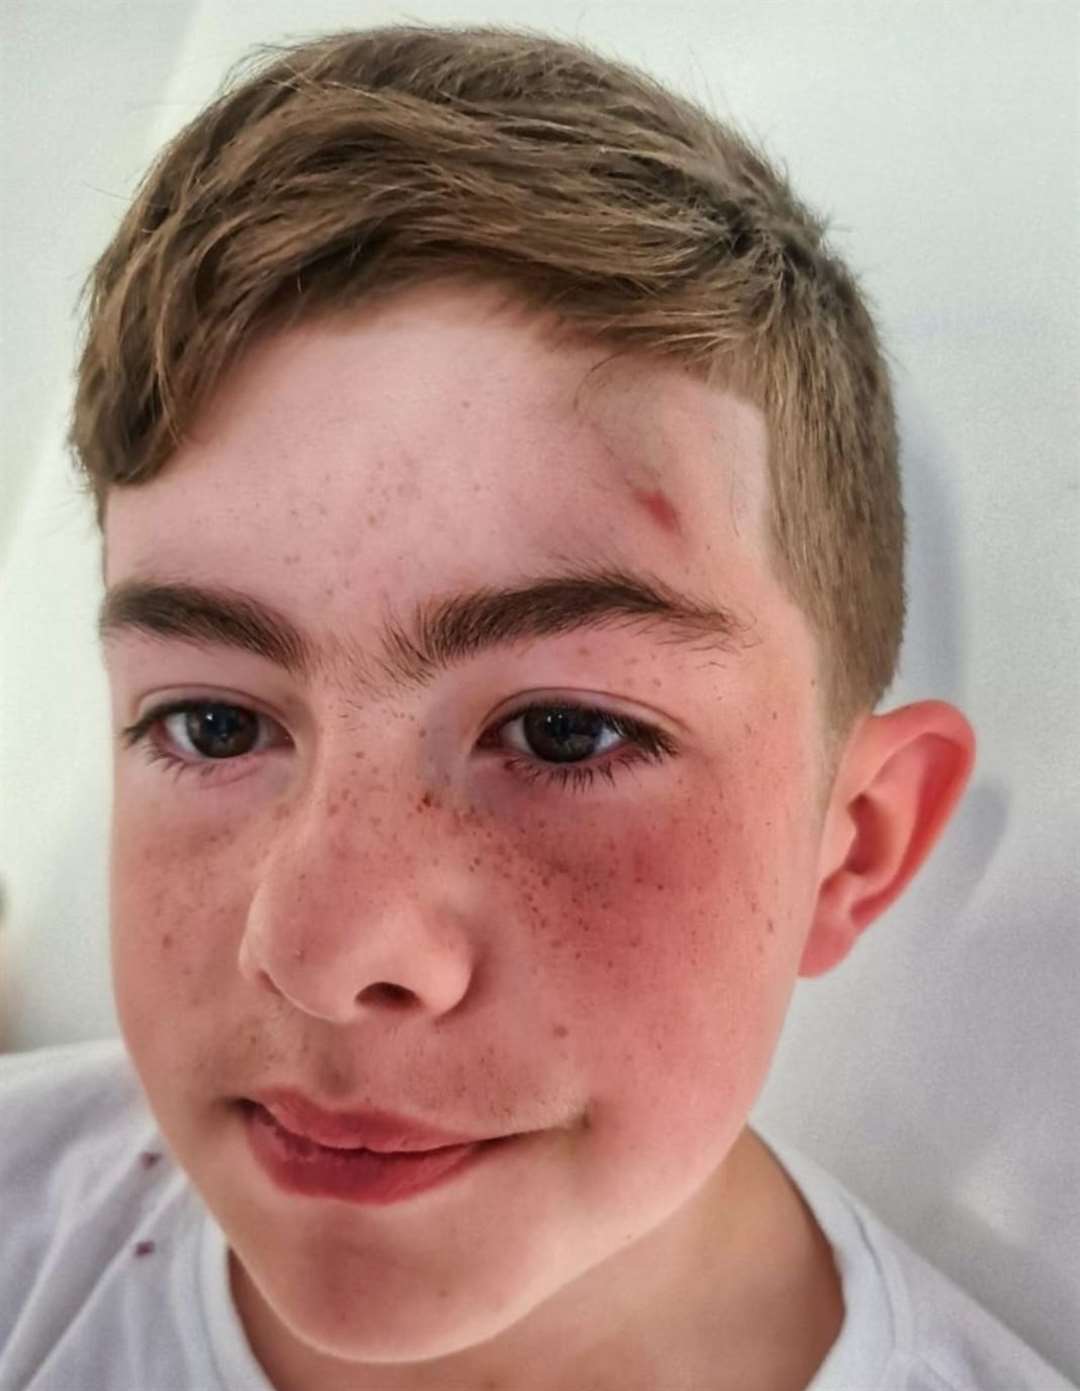 Owen suffered cuts and bruises to his face